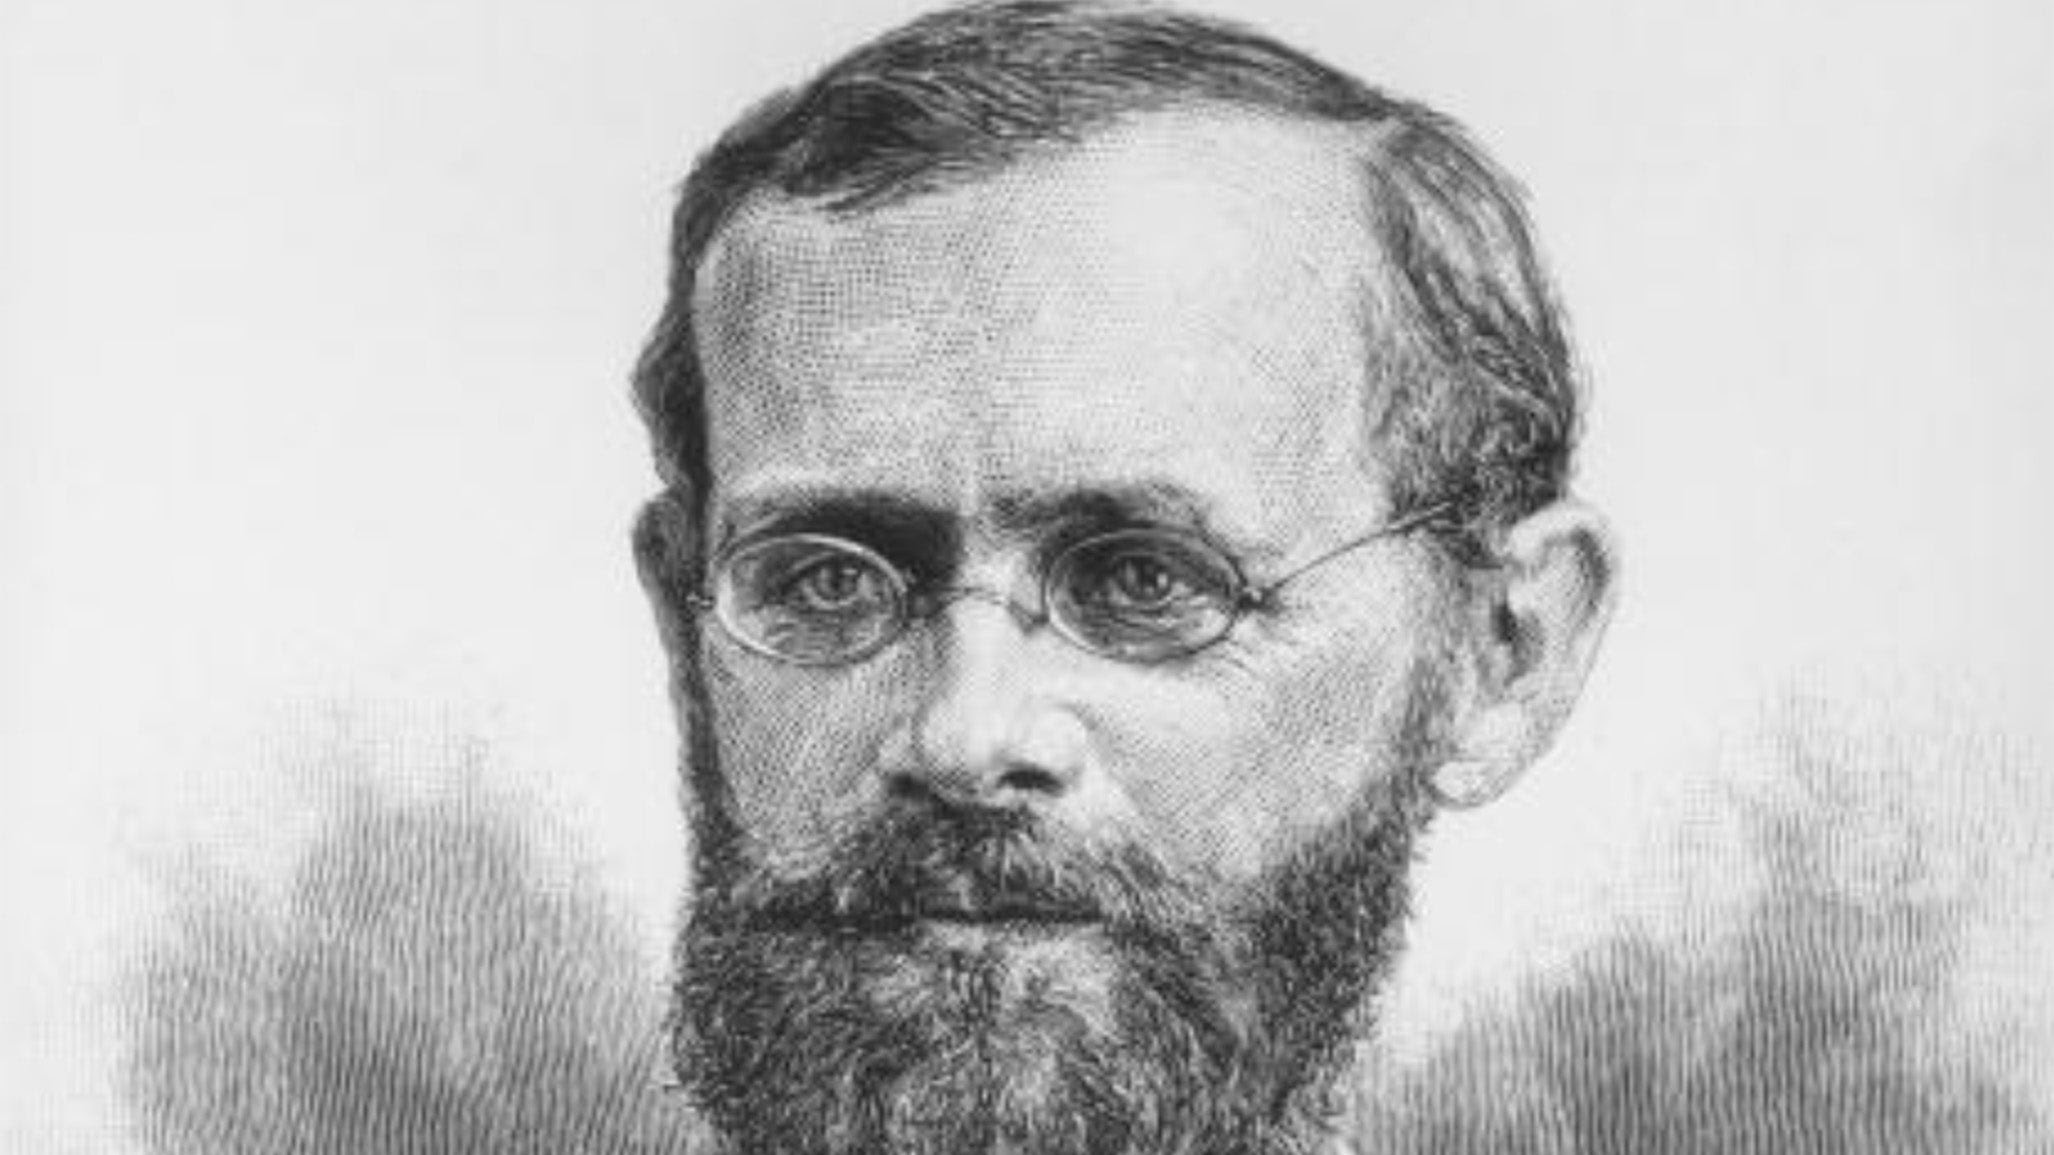 A black and white engraving of Cleveland Abbe, a pale, balding man with small spectacles, a severe side-part, and a full beard and mustache.